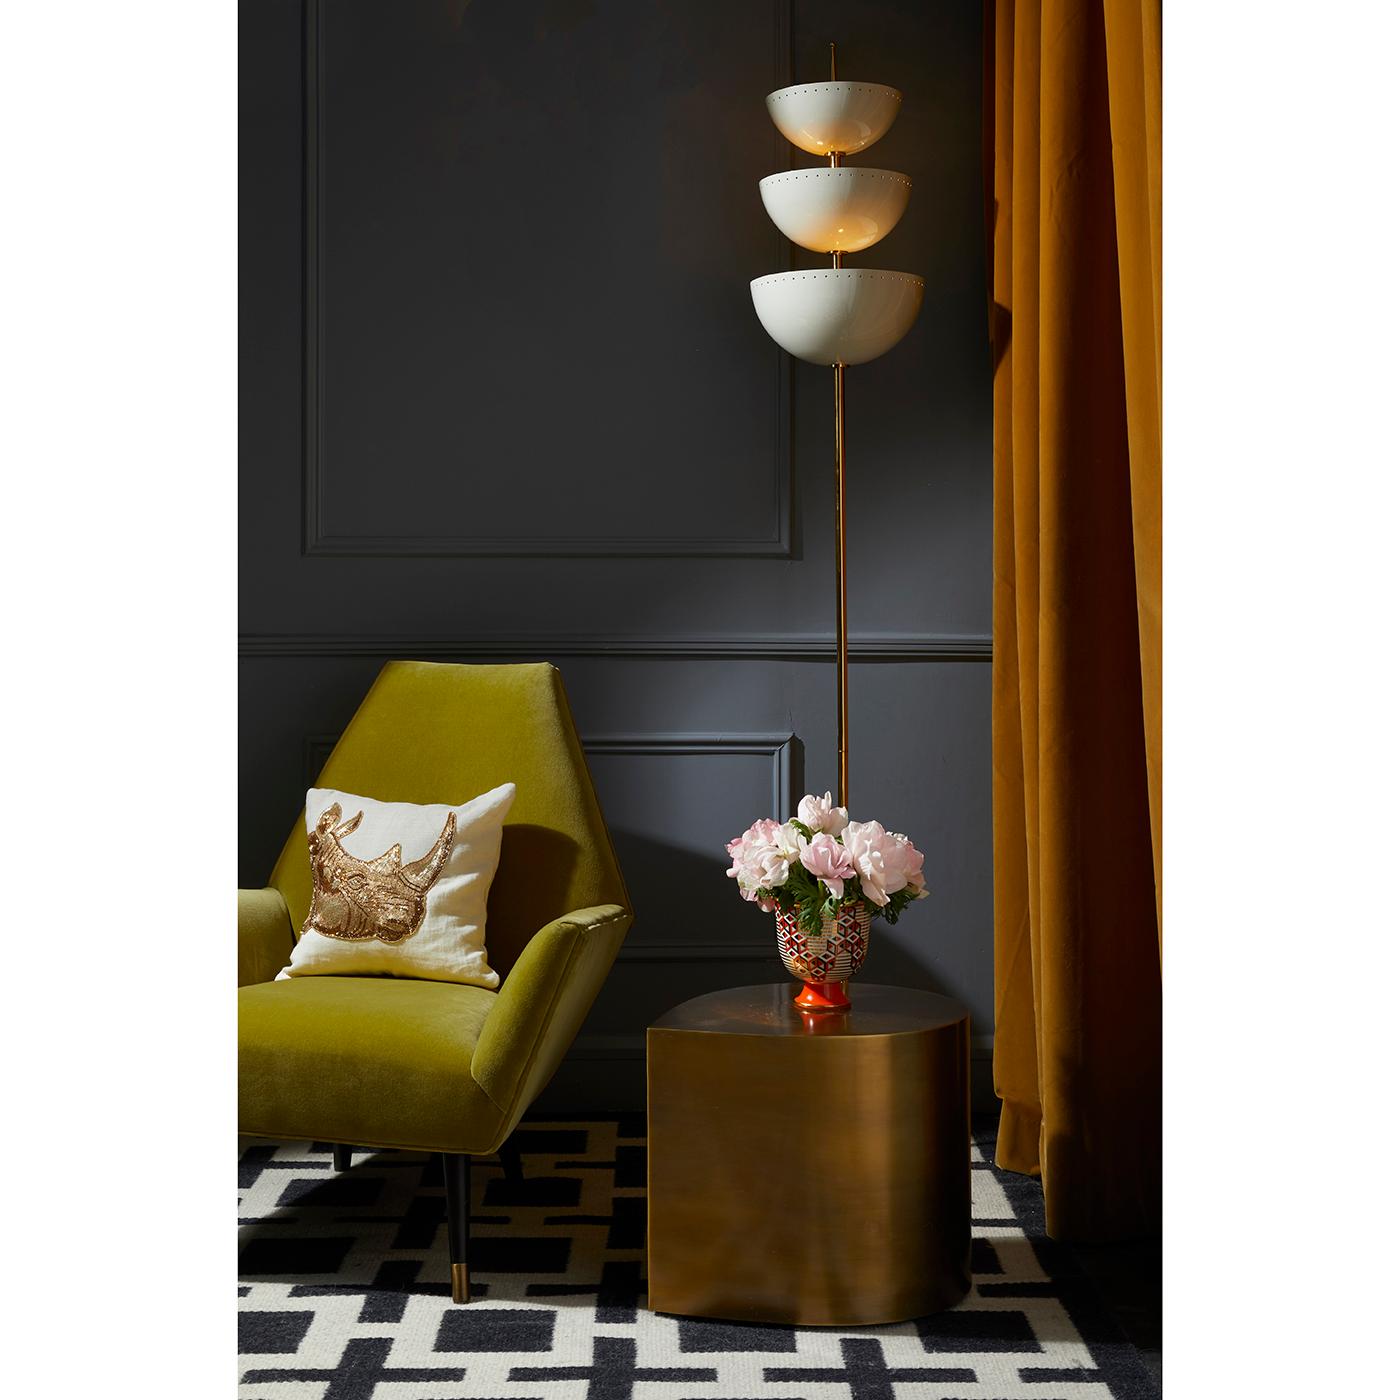 Magic Mood. Wash your room in warm ambient light with our Lisbon Torchiere. A thick marble base with a polished brass stem and three perforated enamel bowls of light, each featuring a double socket for moody uplighting. Fab flanking a fireplace or